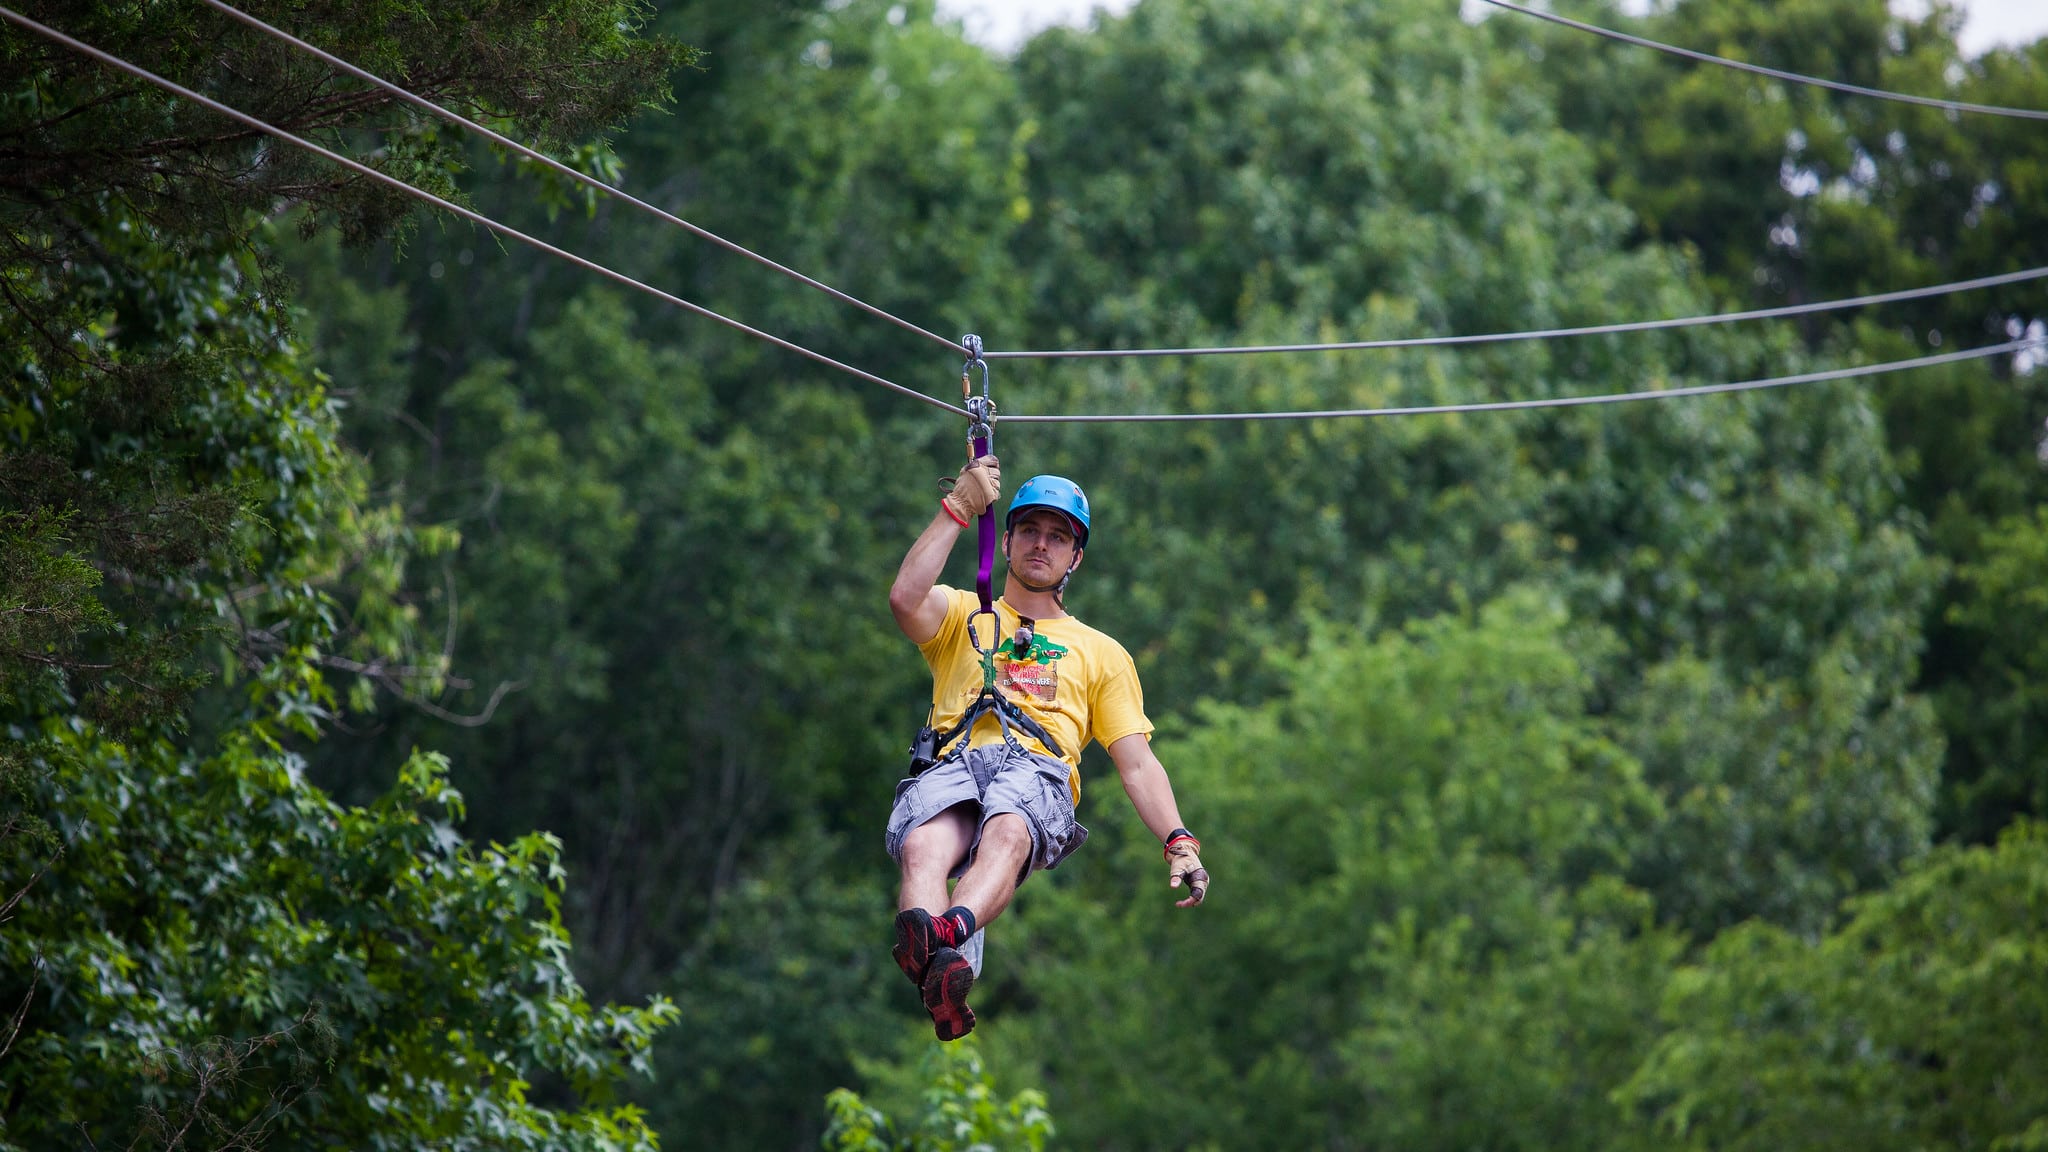 What to Expect on a Zipline Tour